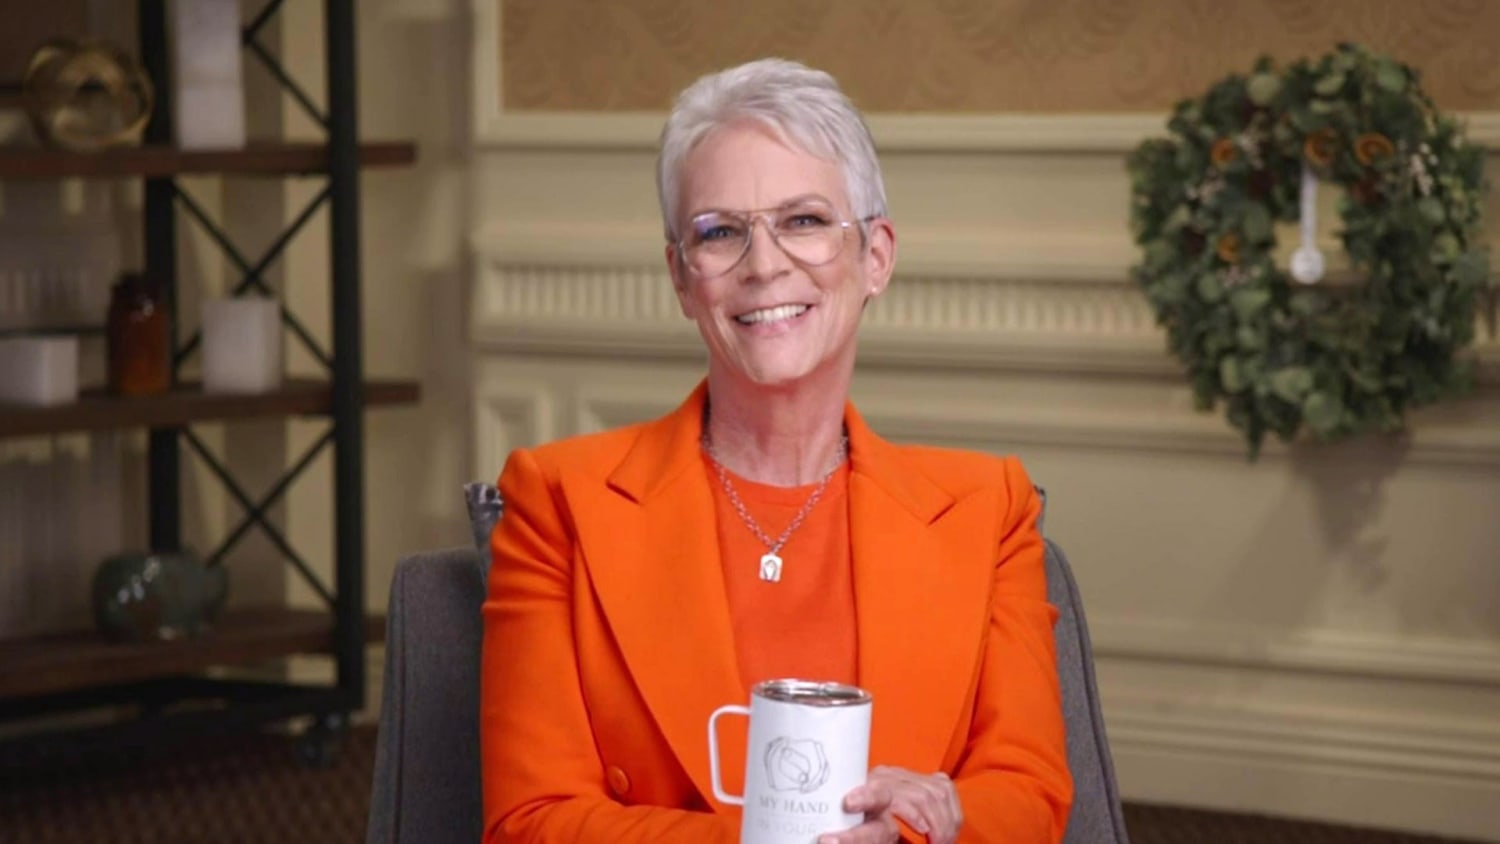 Jamie Lee Curtis reveals why she did Activia yogurt commercials